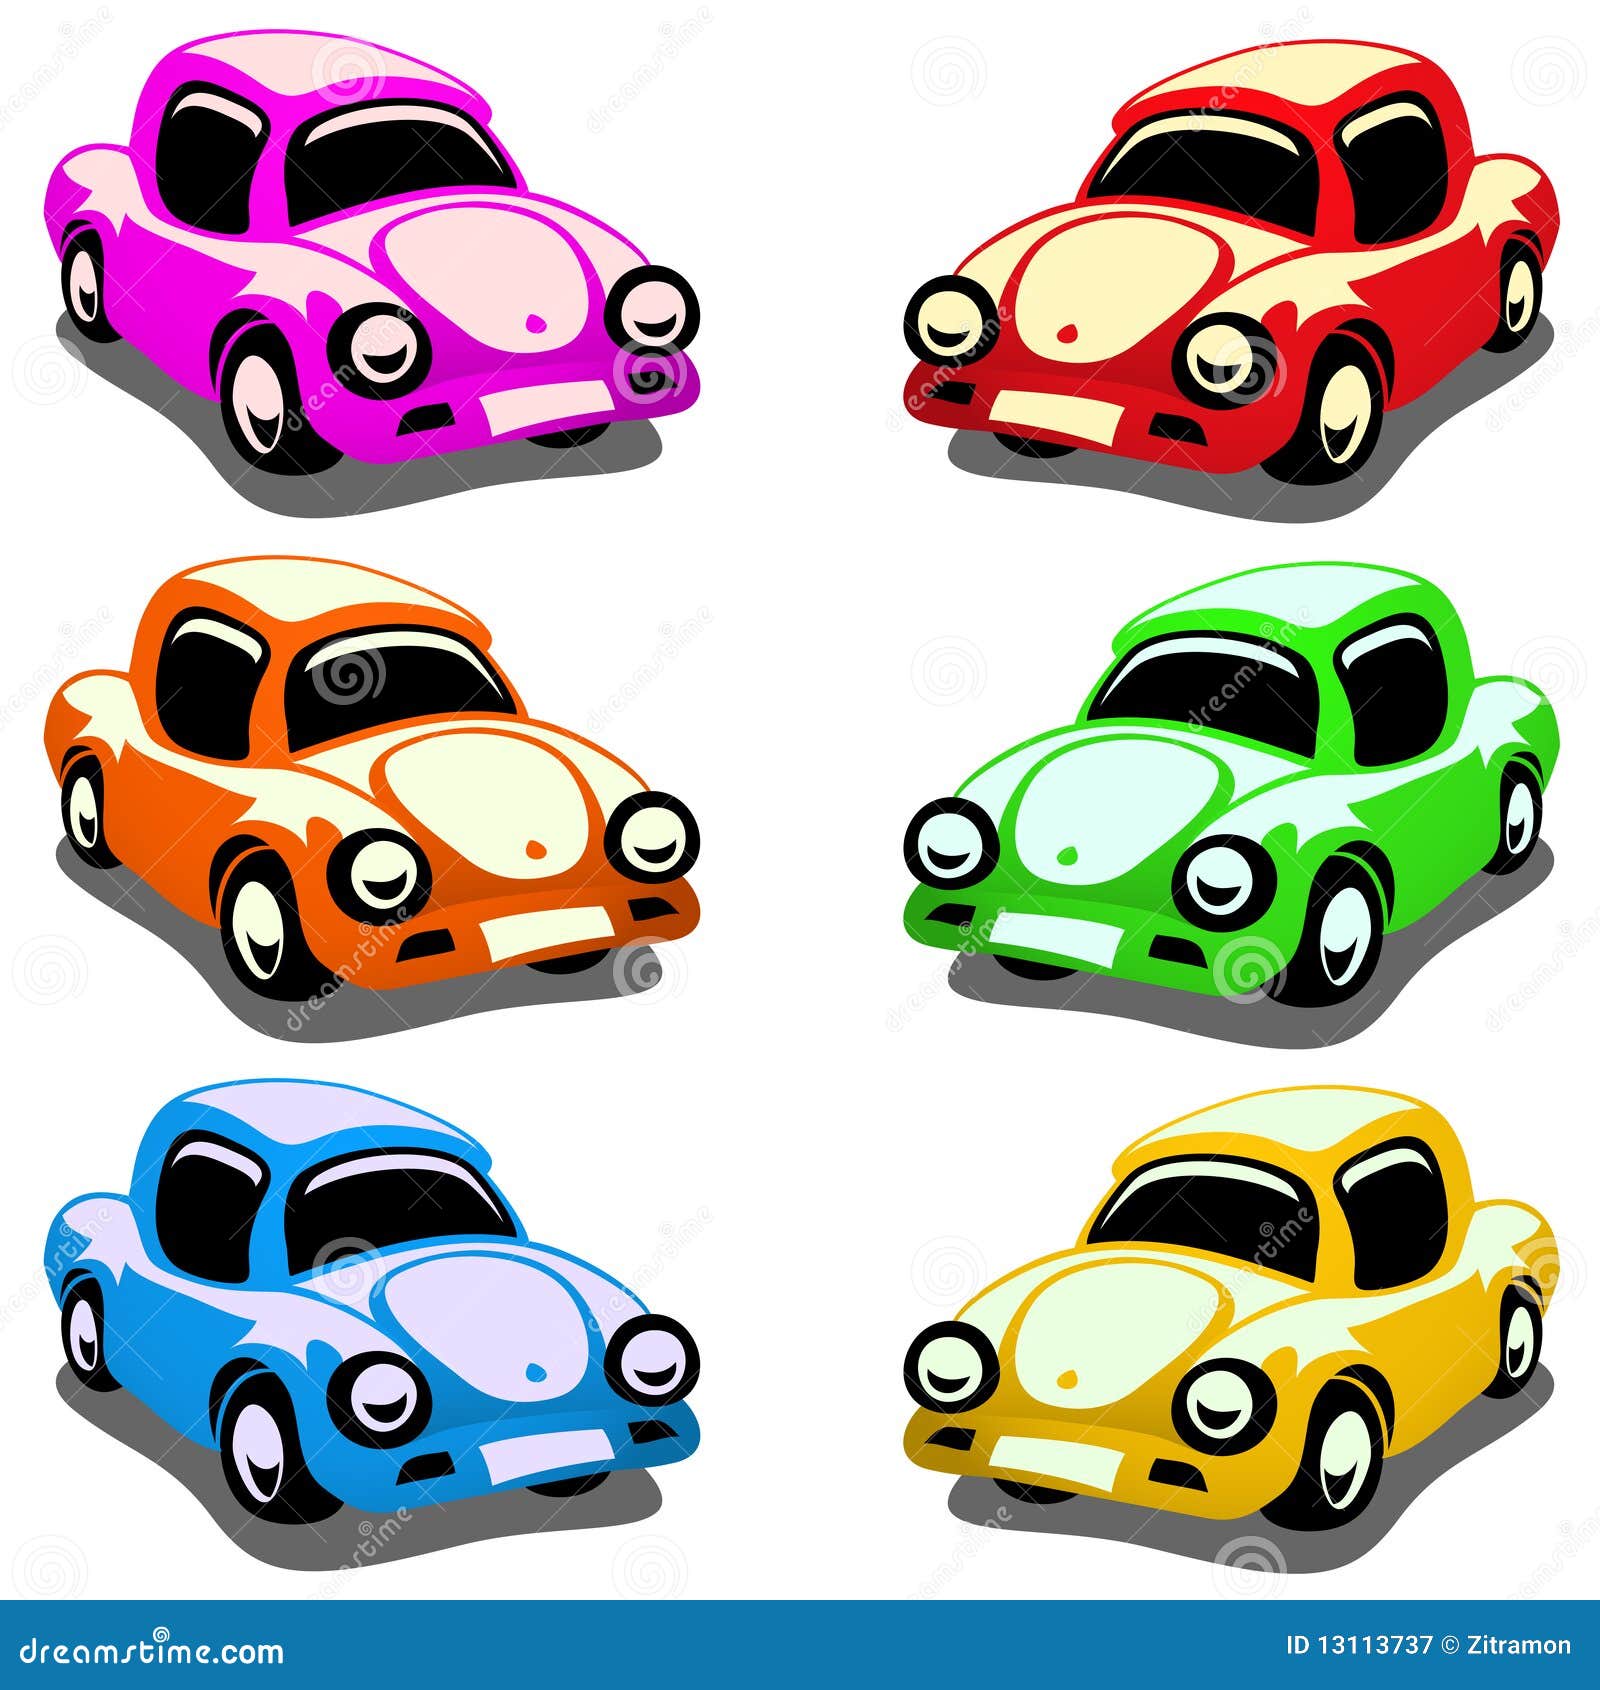 clipart toy car - photo #19